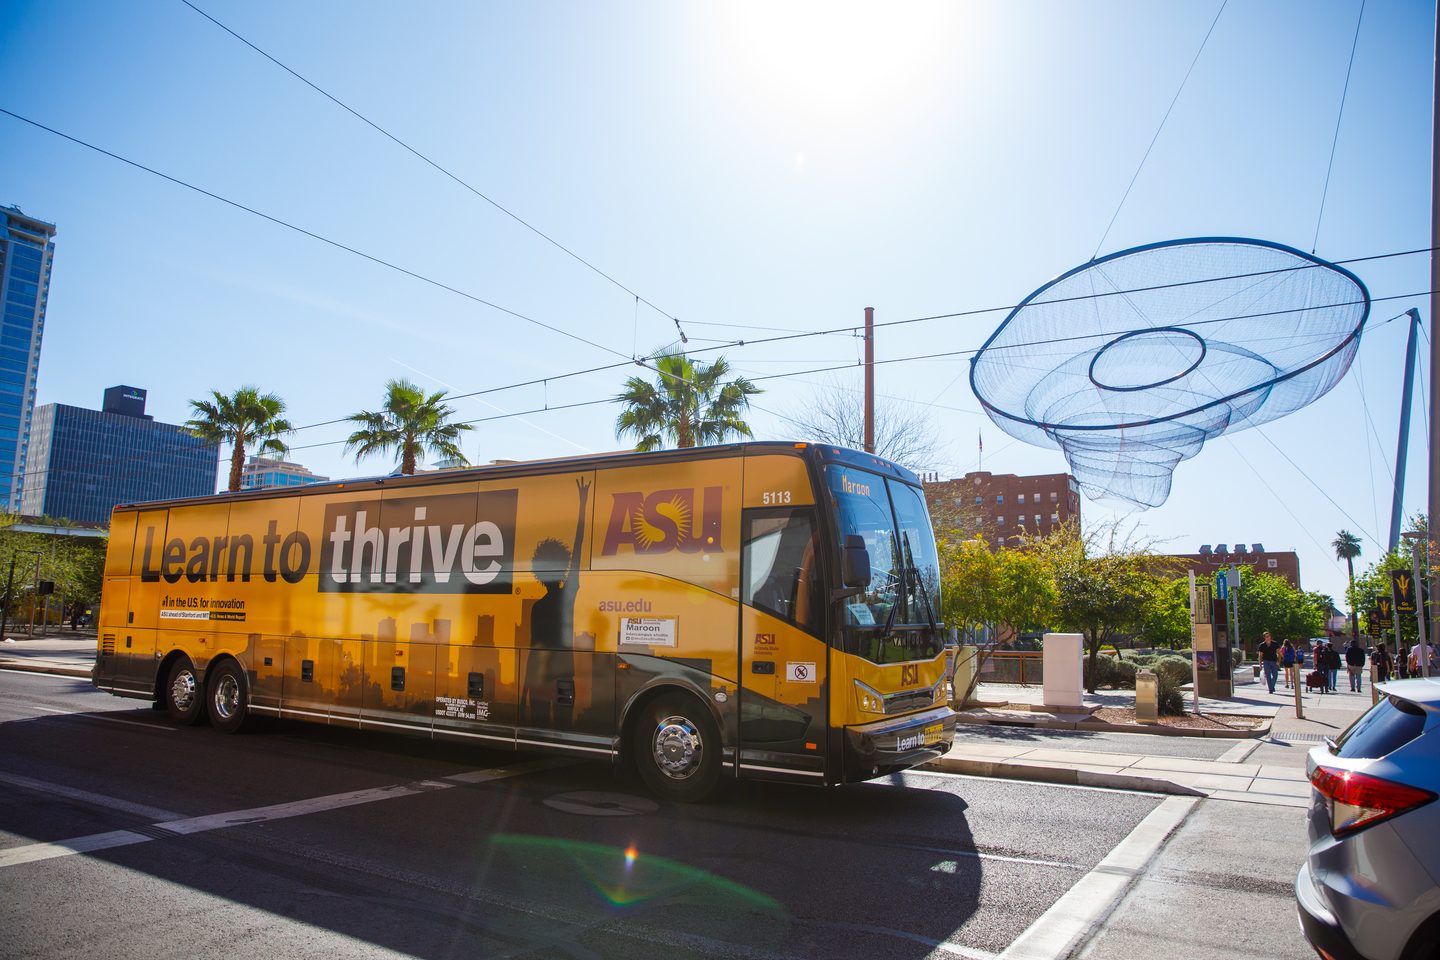 ASU bus on the road of Downtown campus